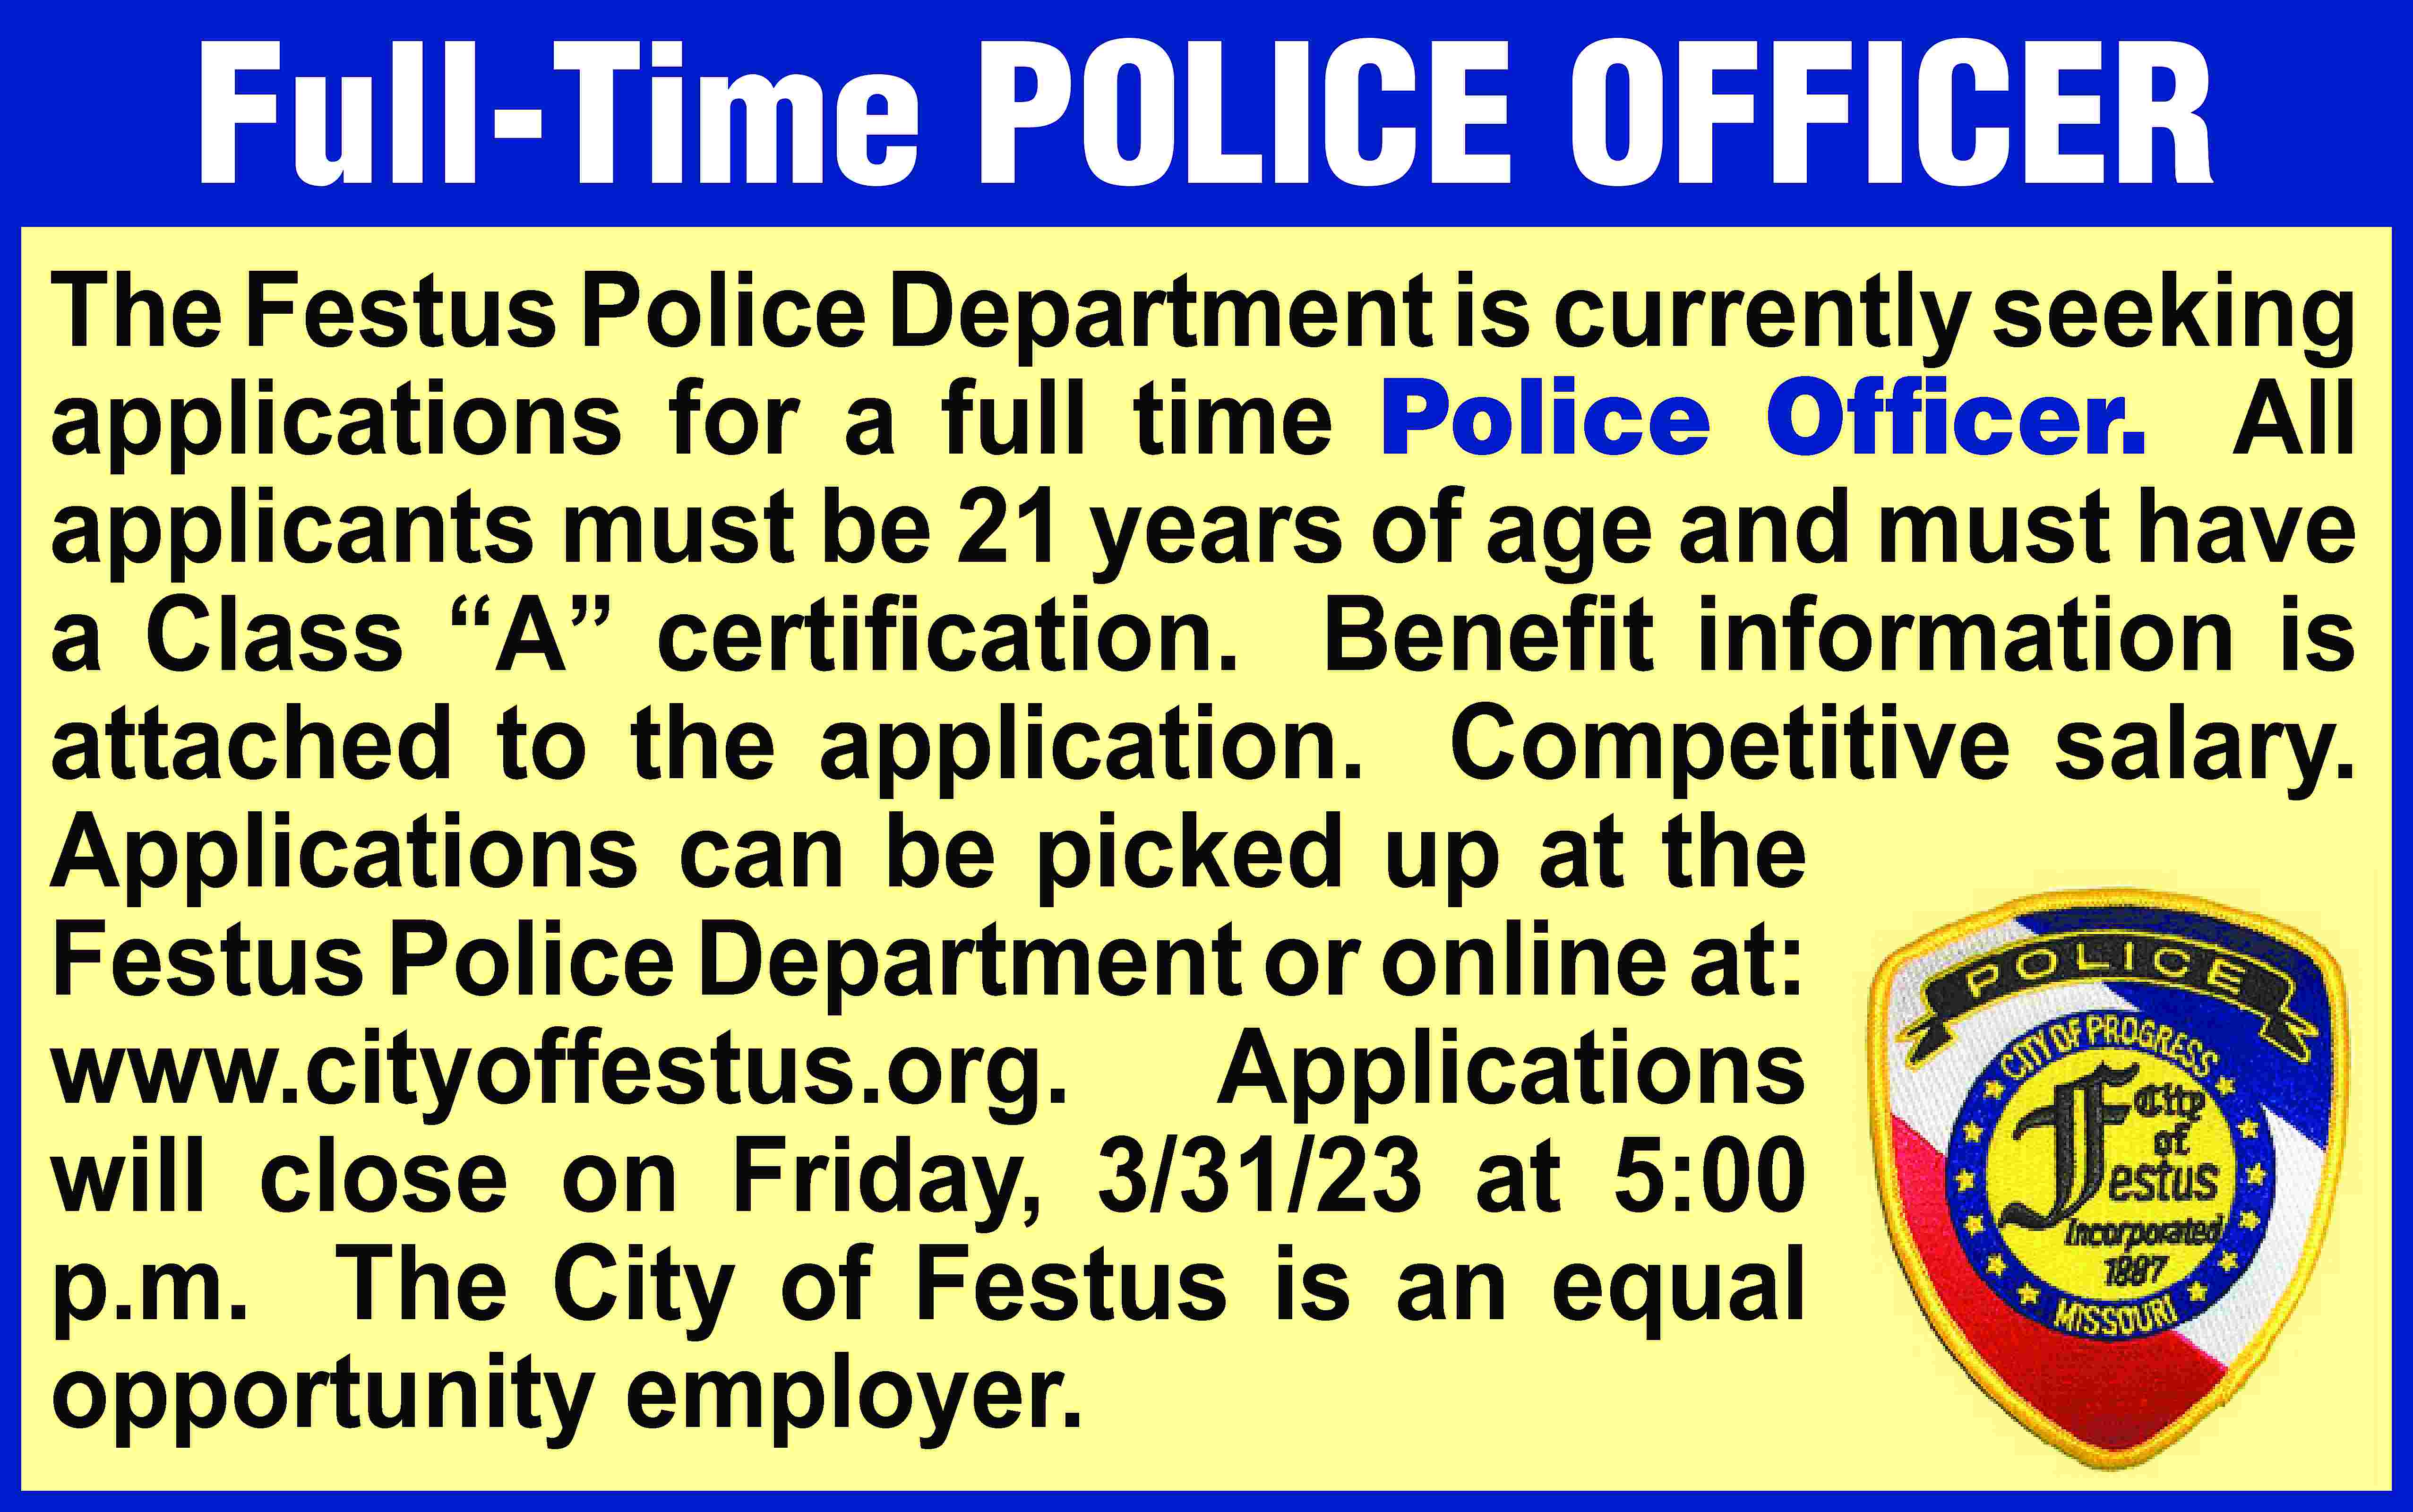 Full-Time POLICE OFFICER The Festus  Full-Time POLICE OFFICER The Festus Police Department is currently seeking applications for a full time Police Officer. All applicants must be 21 years of age and must have a Class “A” certiﬁcation. Beneﬁt information is attached to the application. Competitive salary. Applications can be picked up at the Festus Police Department or online at: www.cityoffestus.org. Applications will close on Friday, 3/31/23 at 5:00 p.m. The City of Festus is an equal opportunity employer.